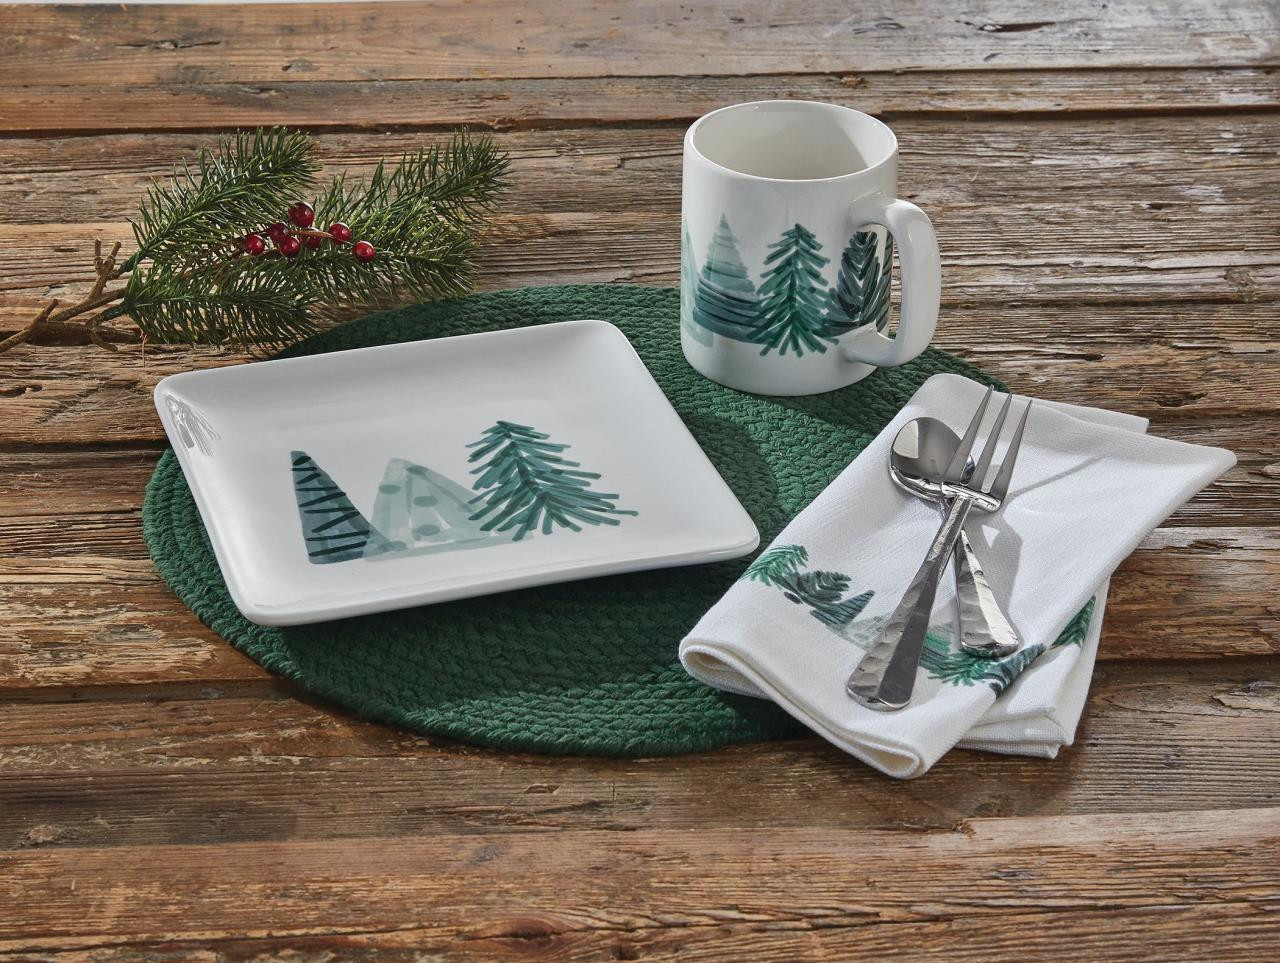 https://cdn11.bigcommerce.com/s-tfdhmk/images/stencil/1280x1280/products/23624/143884/Hand-Painted-Holiday-Mugs-Set-of-4-762242031876_image2__43771.1666314929.jpg?c=2